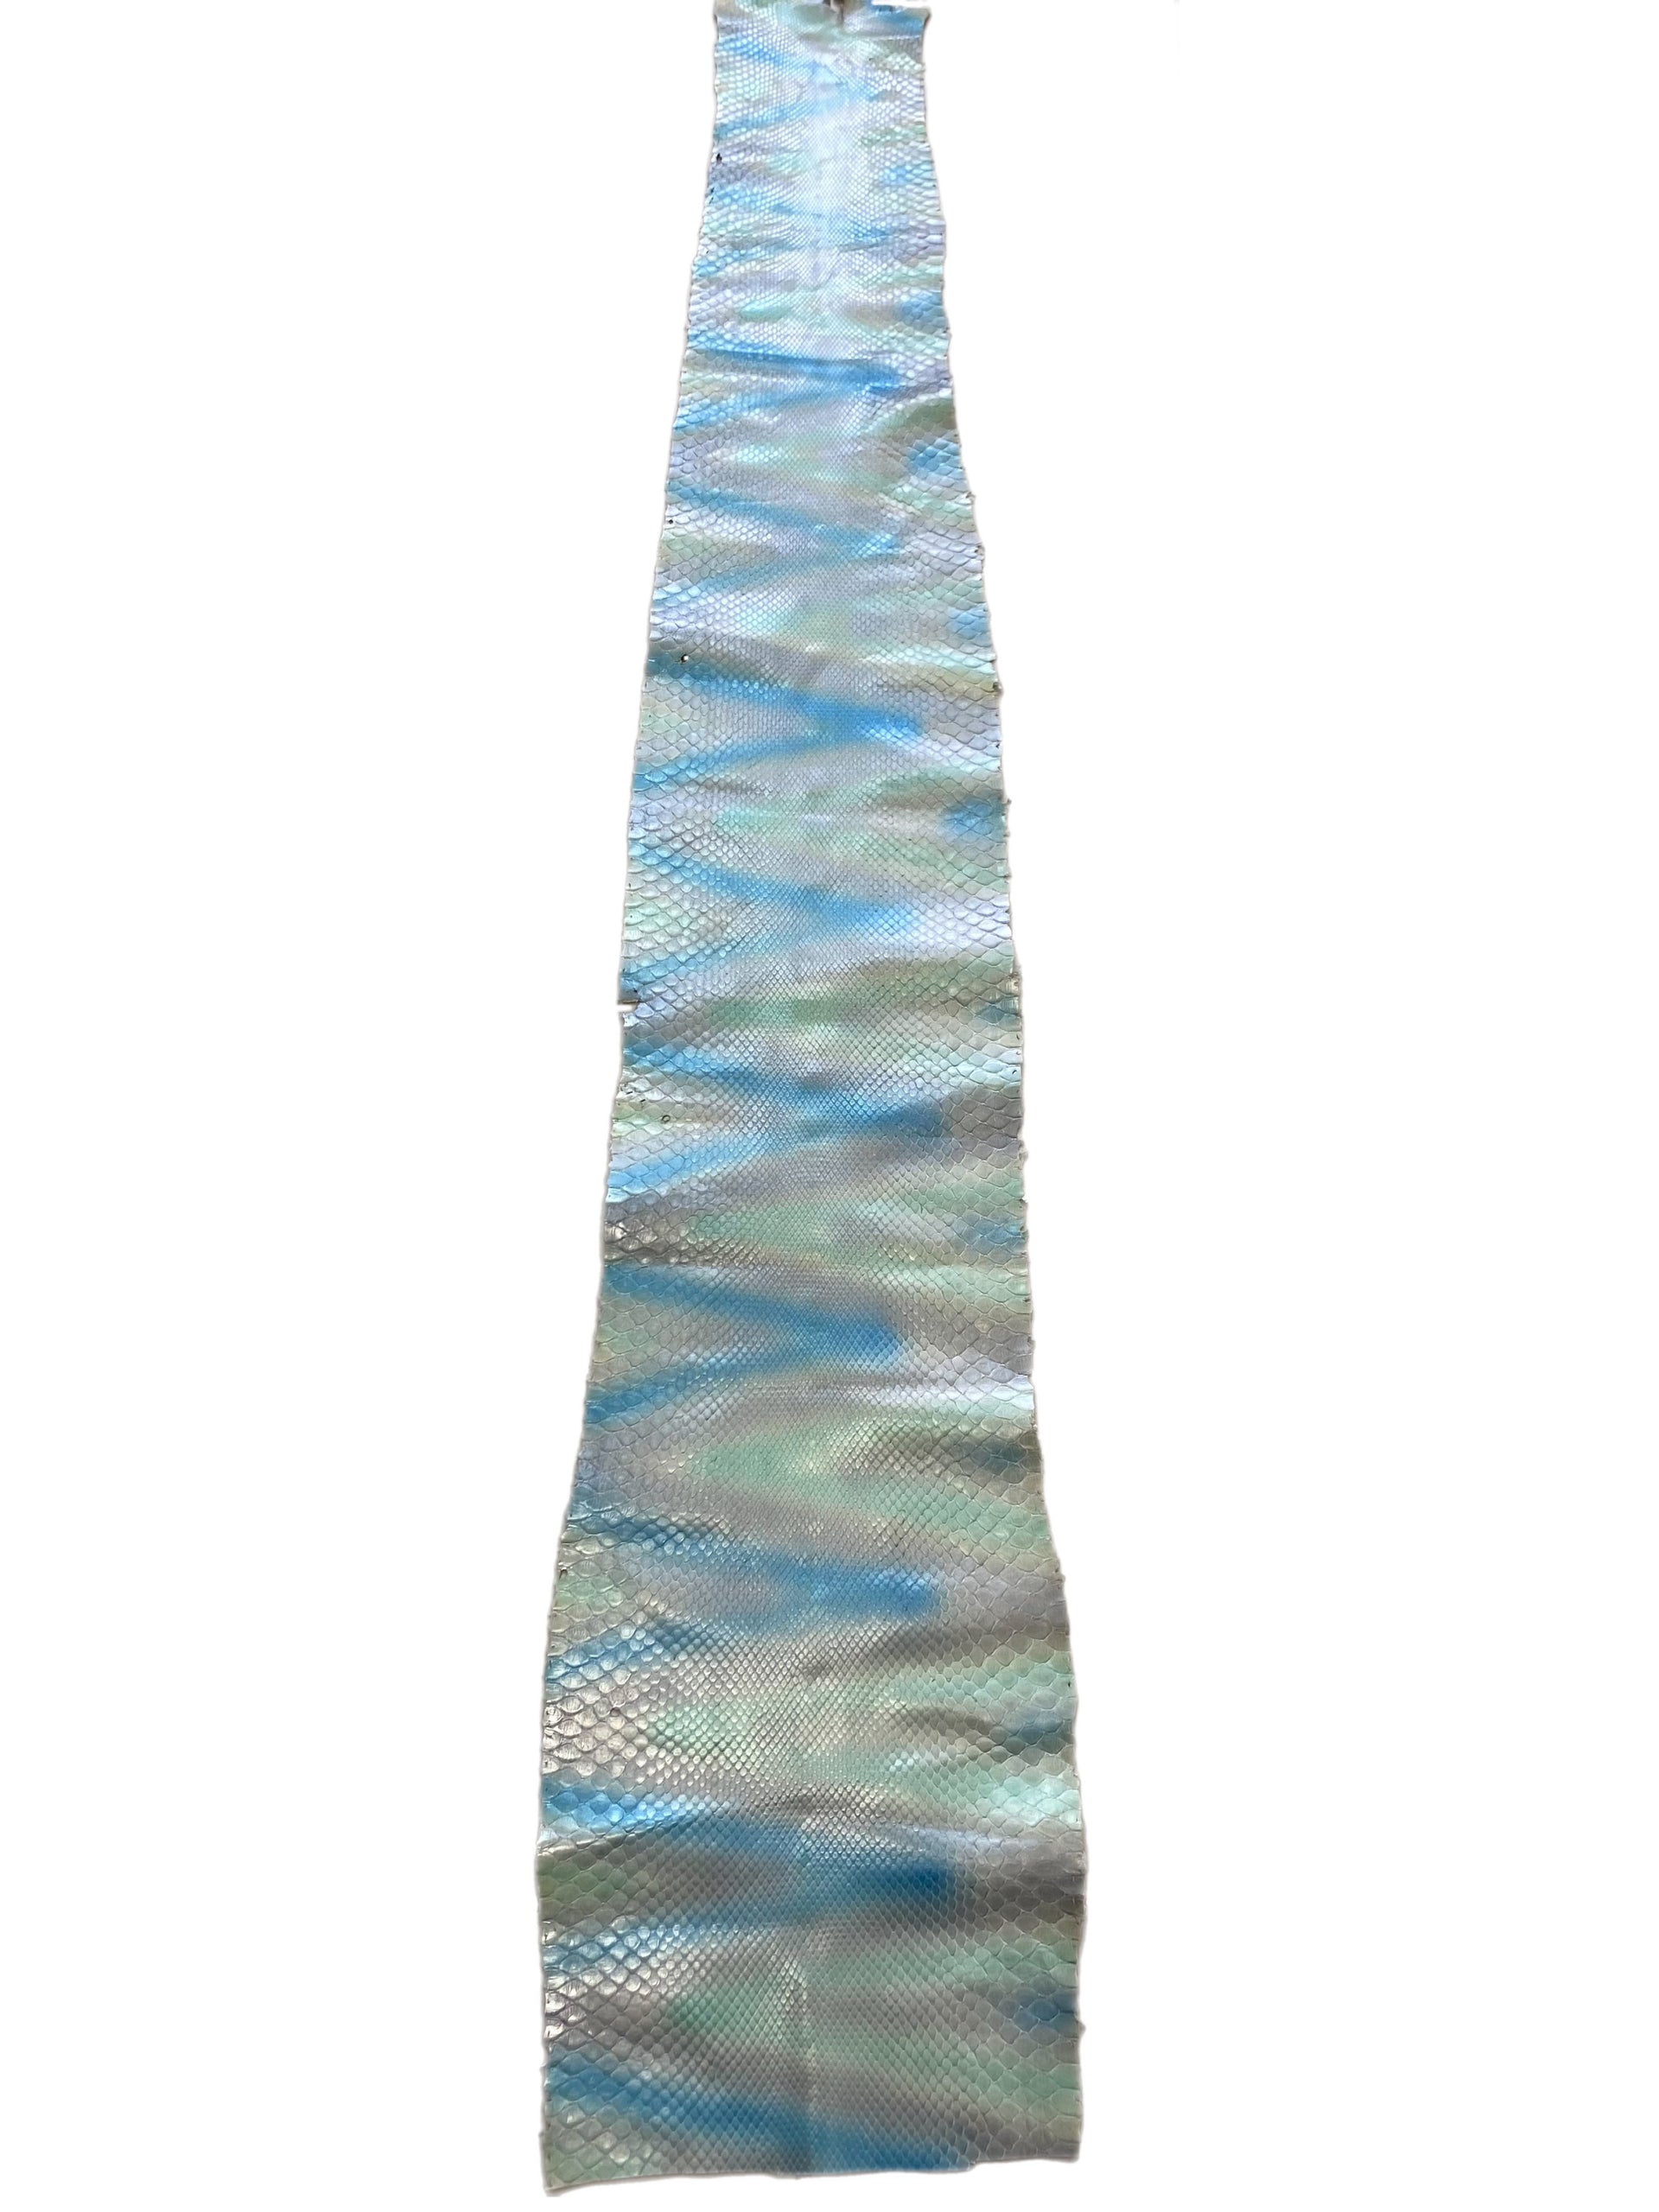 1.6 Meter Front Cut Silver/Blue/Green Python Leather